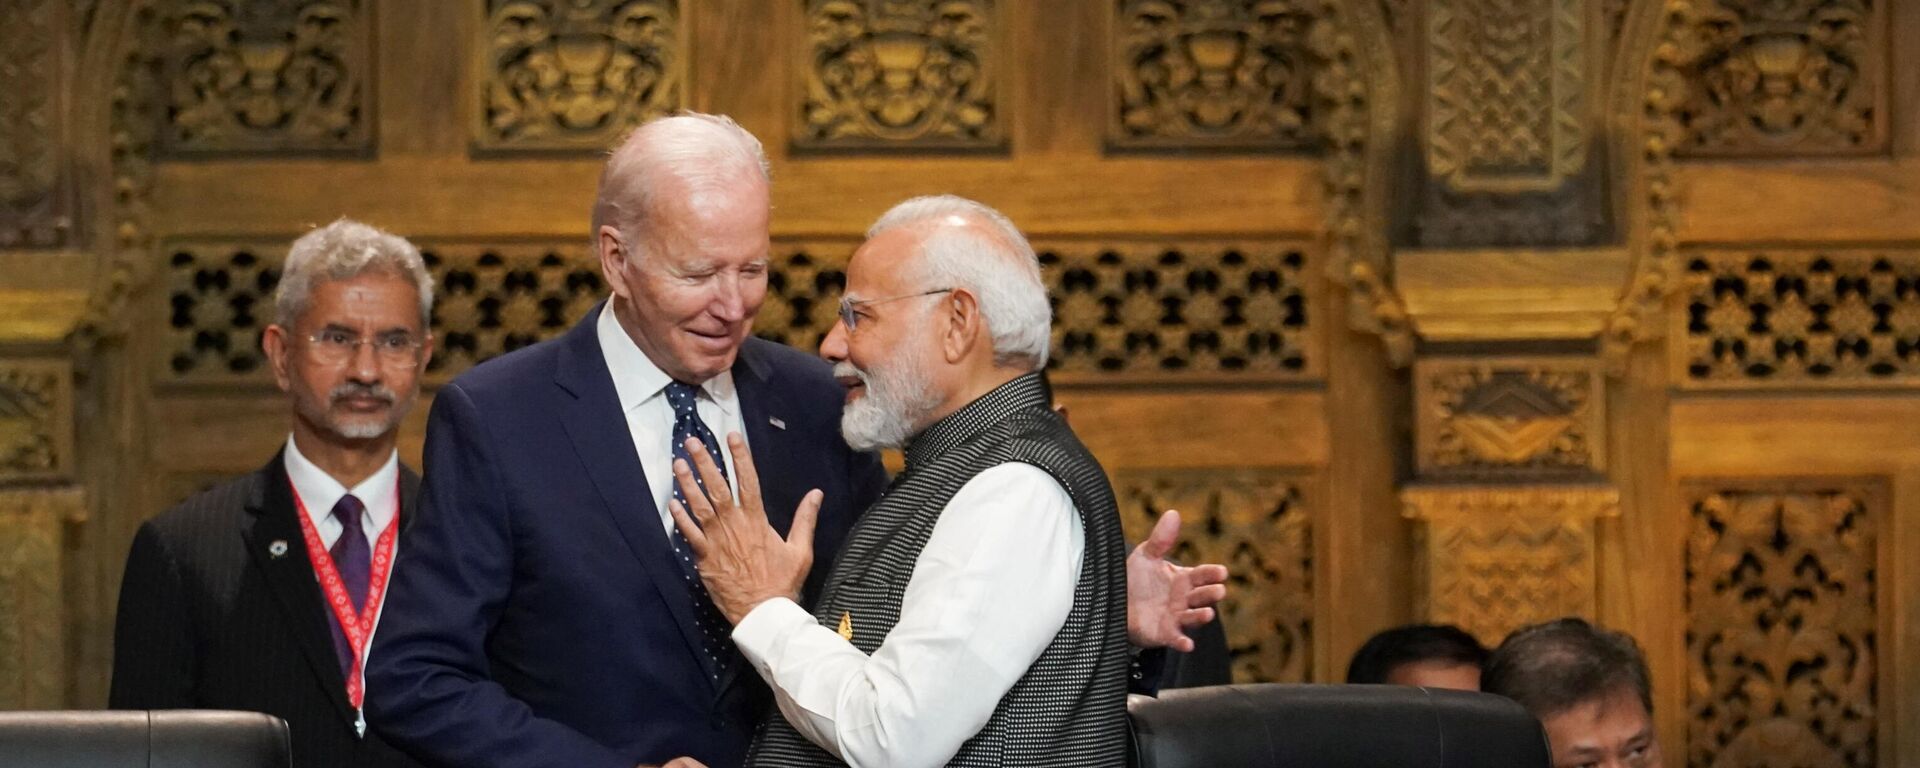 India's Prime Minister Narendra Modi (R) talks with US President Joe Biden (C) as India's Foreign Minister Subrahmanyam Jaishankar looks on during the first working session of the G20 leaders' summit in Nusa Dua, on the Indonesian resort island of Bali on November 15, 2022. - Sputnik India, 1920, 10.06.2023